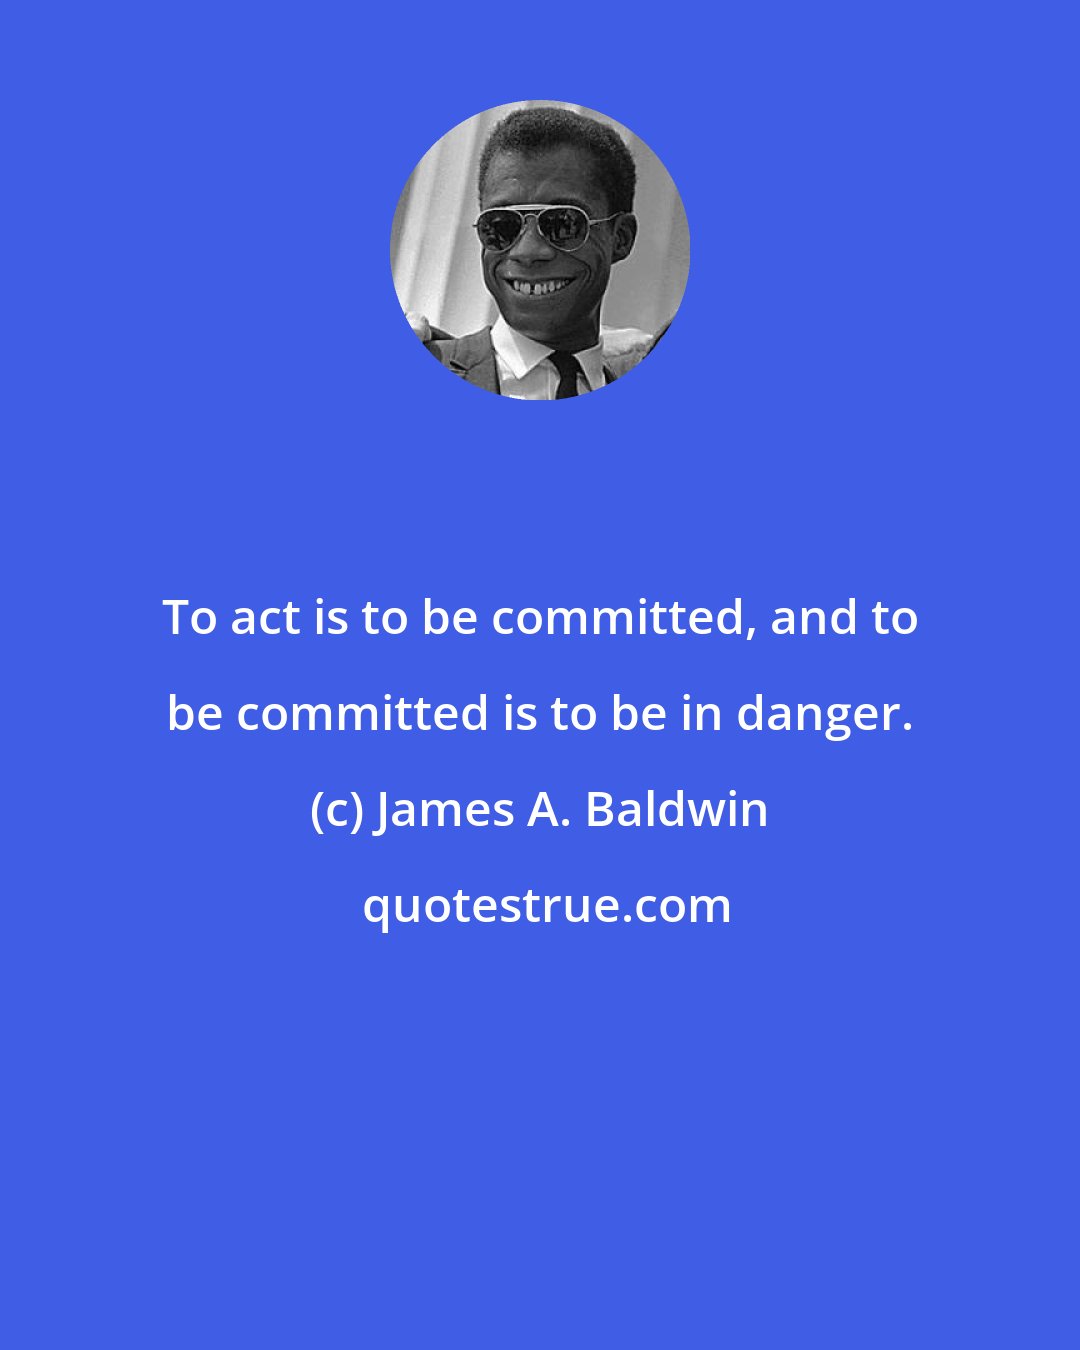 James A. Baldwin: To act is to be committed, and to be committed is to be in danger.